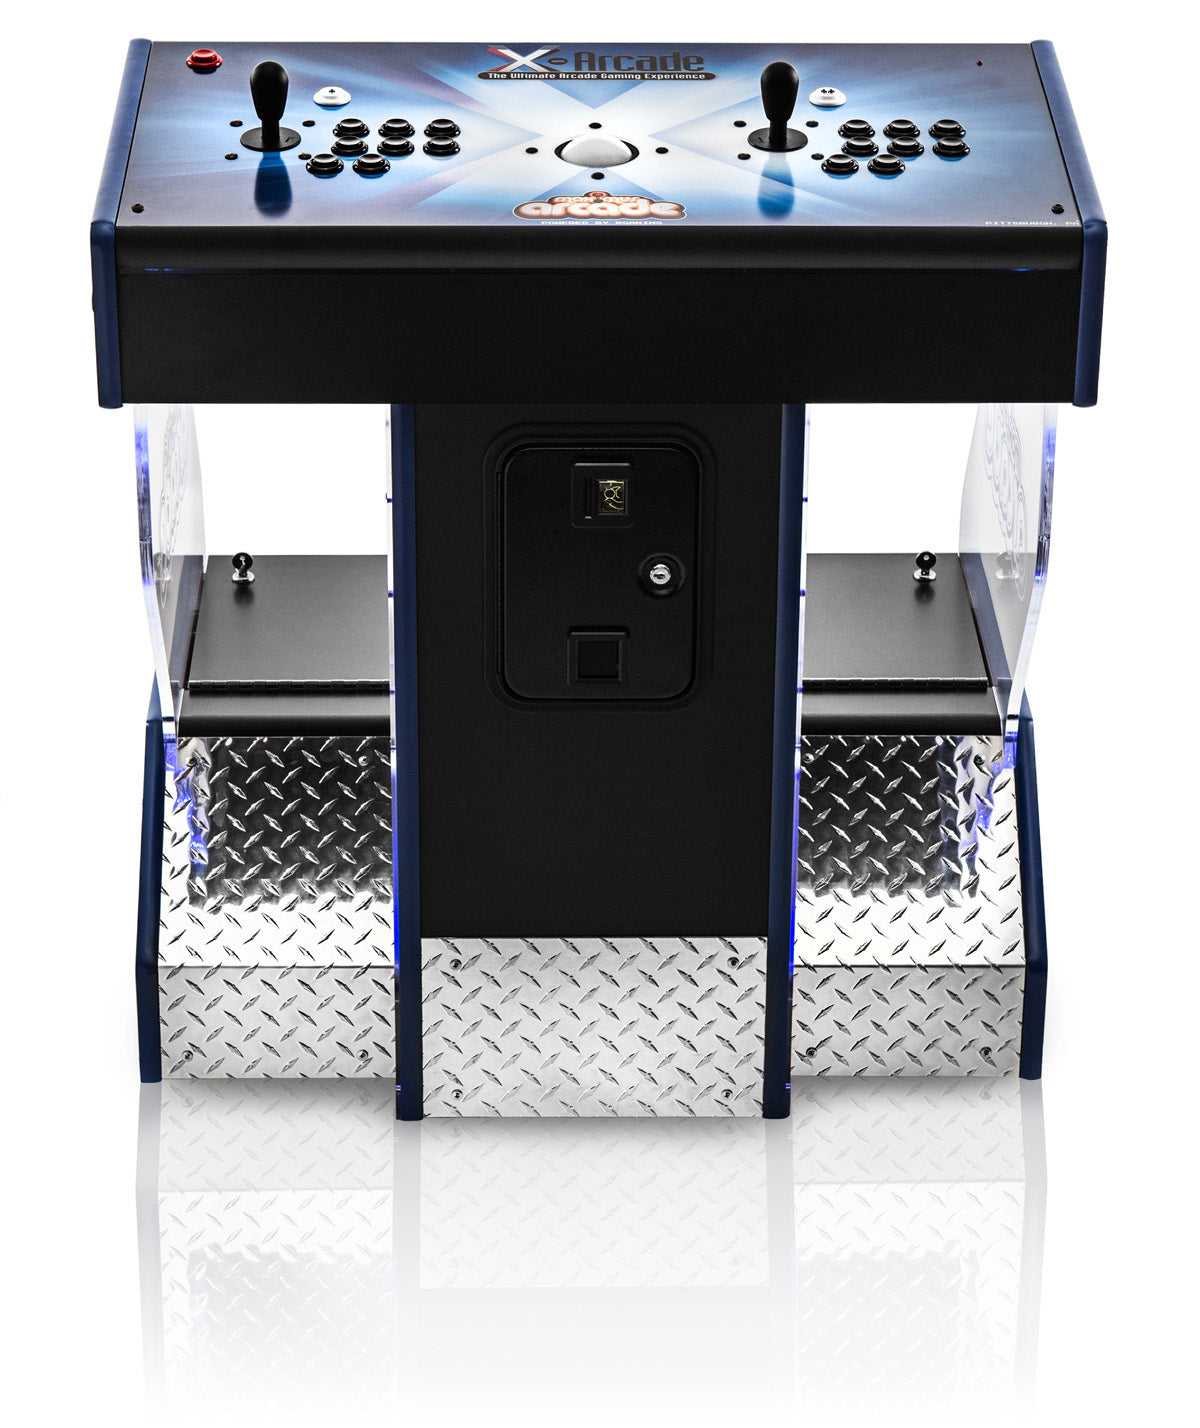 Game X-Arcade Xgaming Indestructible Arcade Controllers Cabinets Arcade Machine and